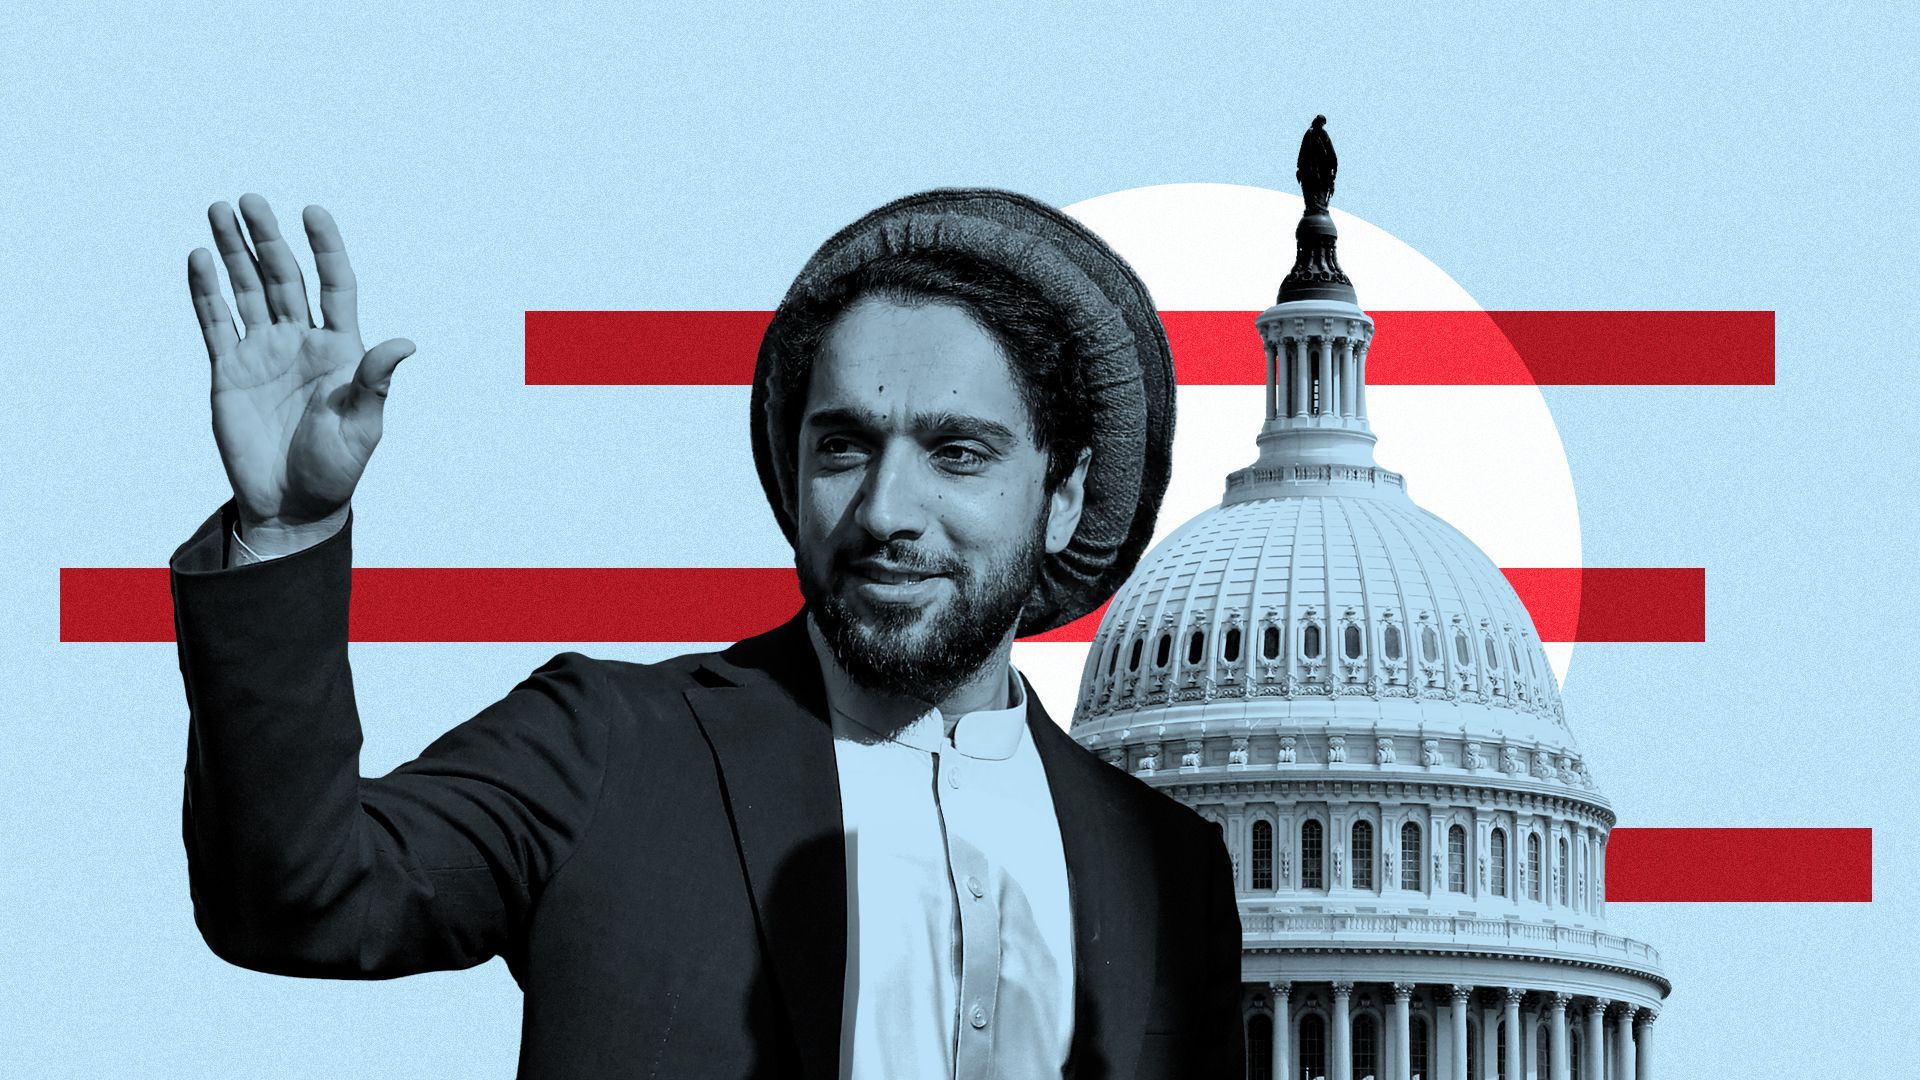 Photo illustration of Ahmad Massoud with the Capitol dome